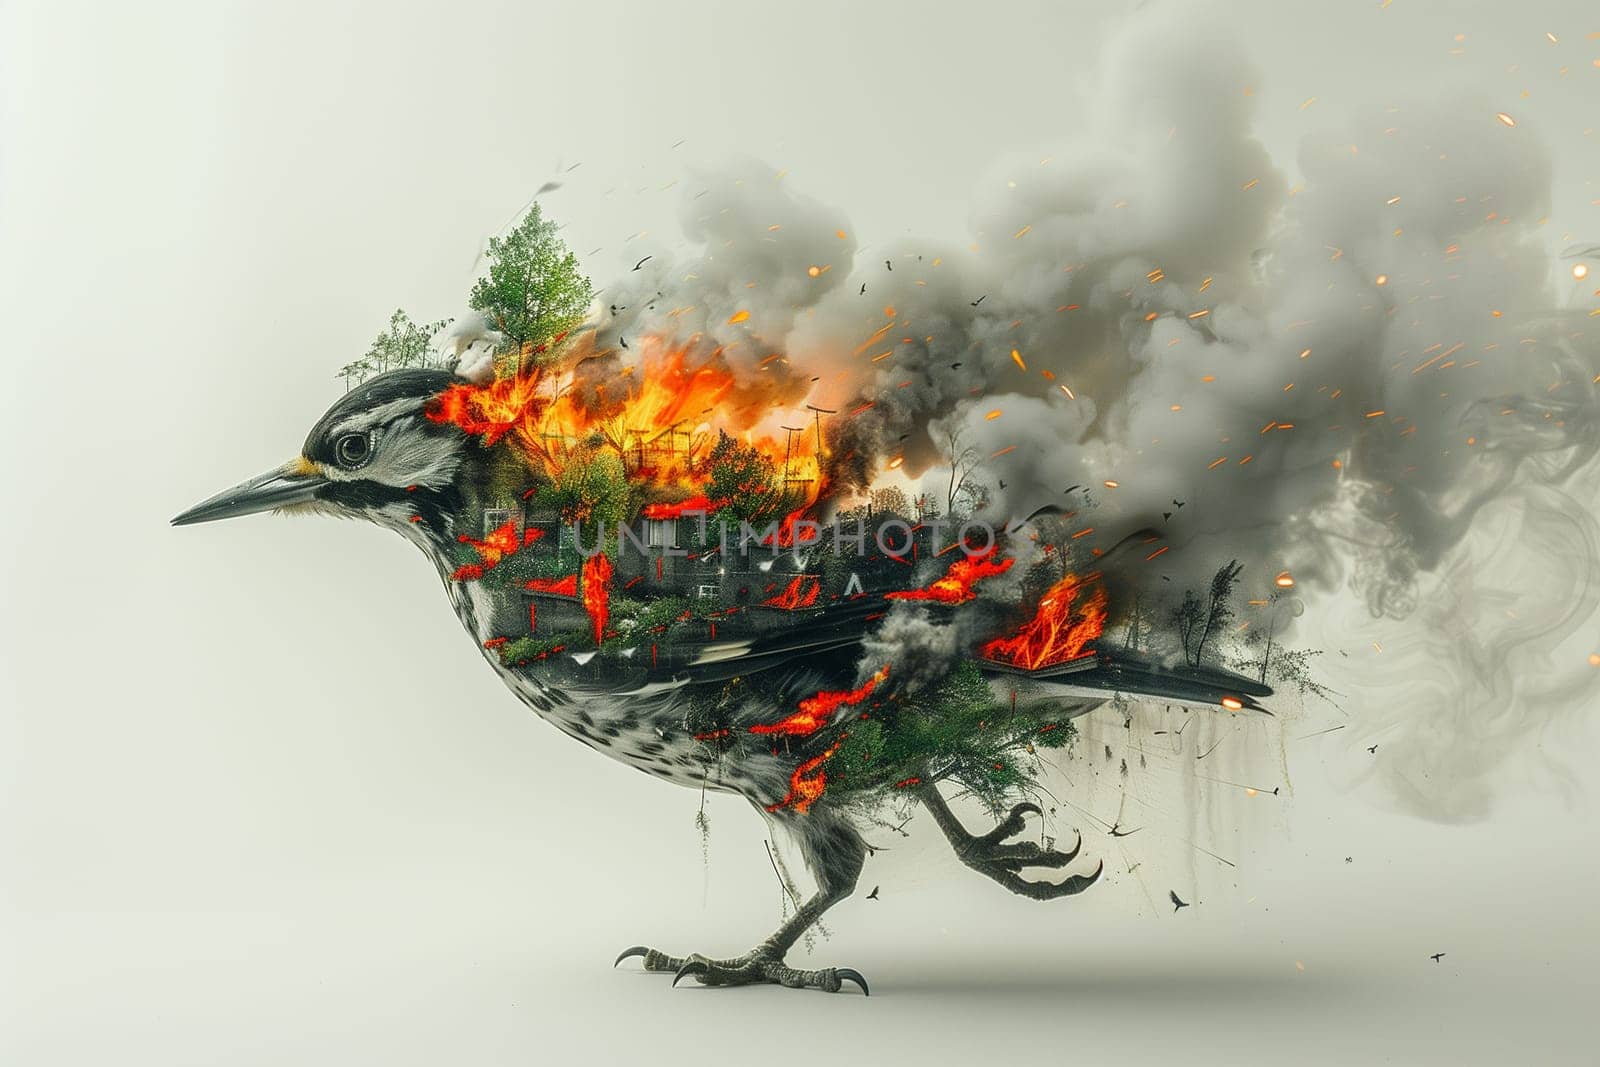 A woodpecker with fiery feathers burning brightly against a forest background symbolizes danger to animals and the environment.